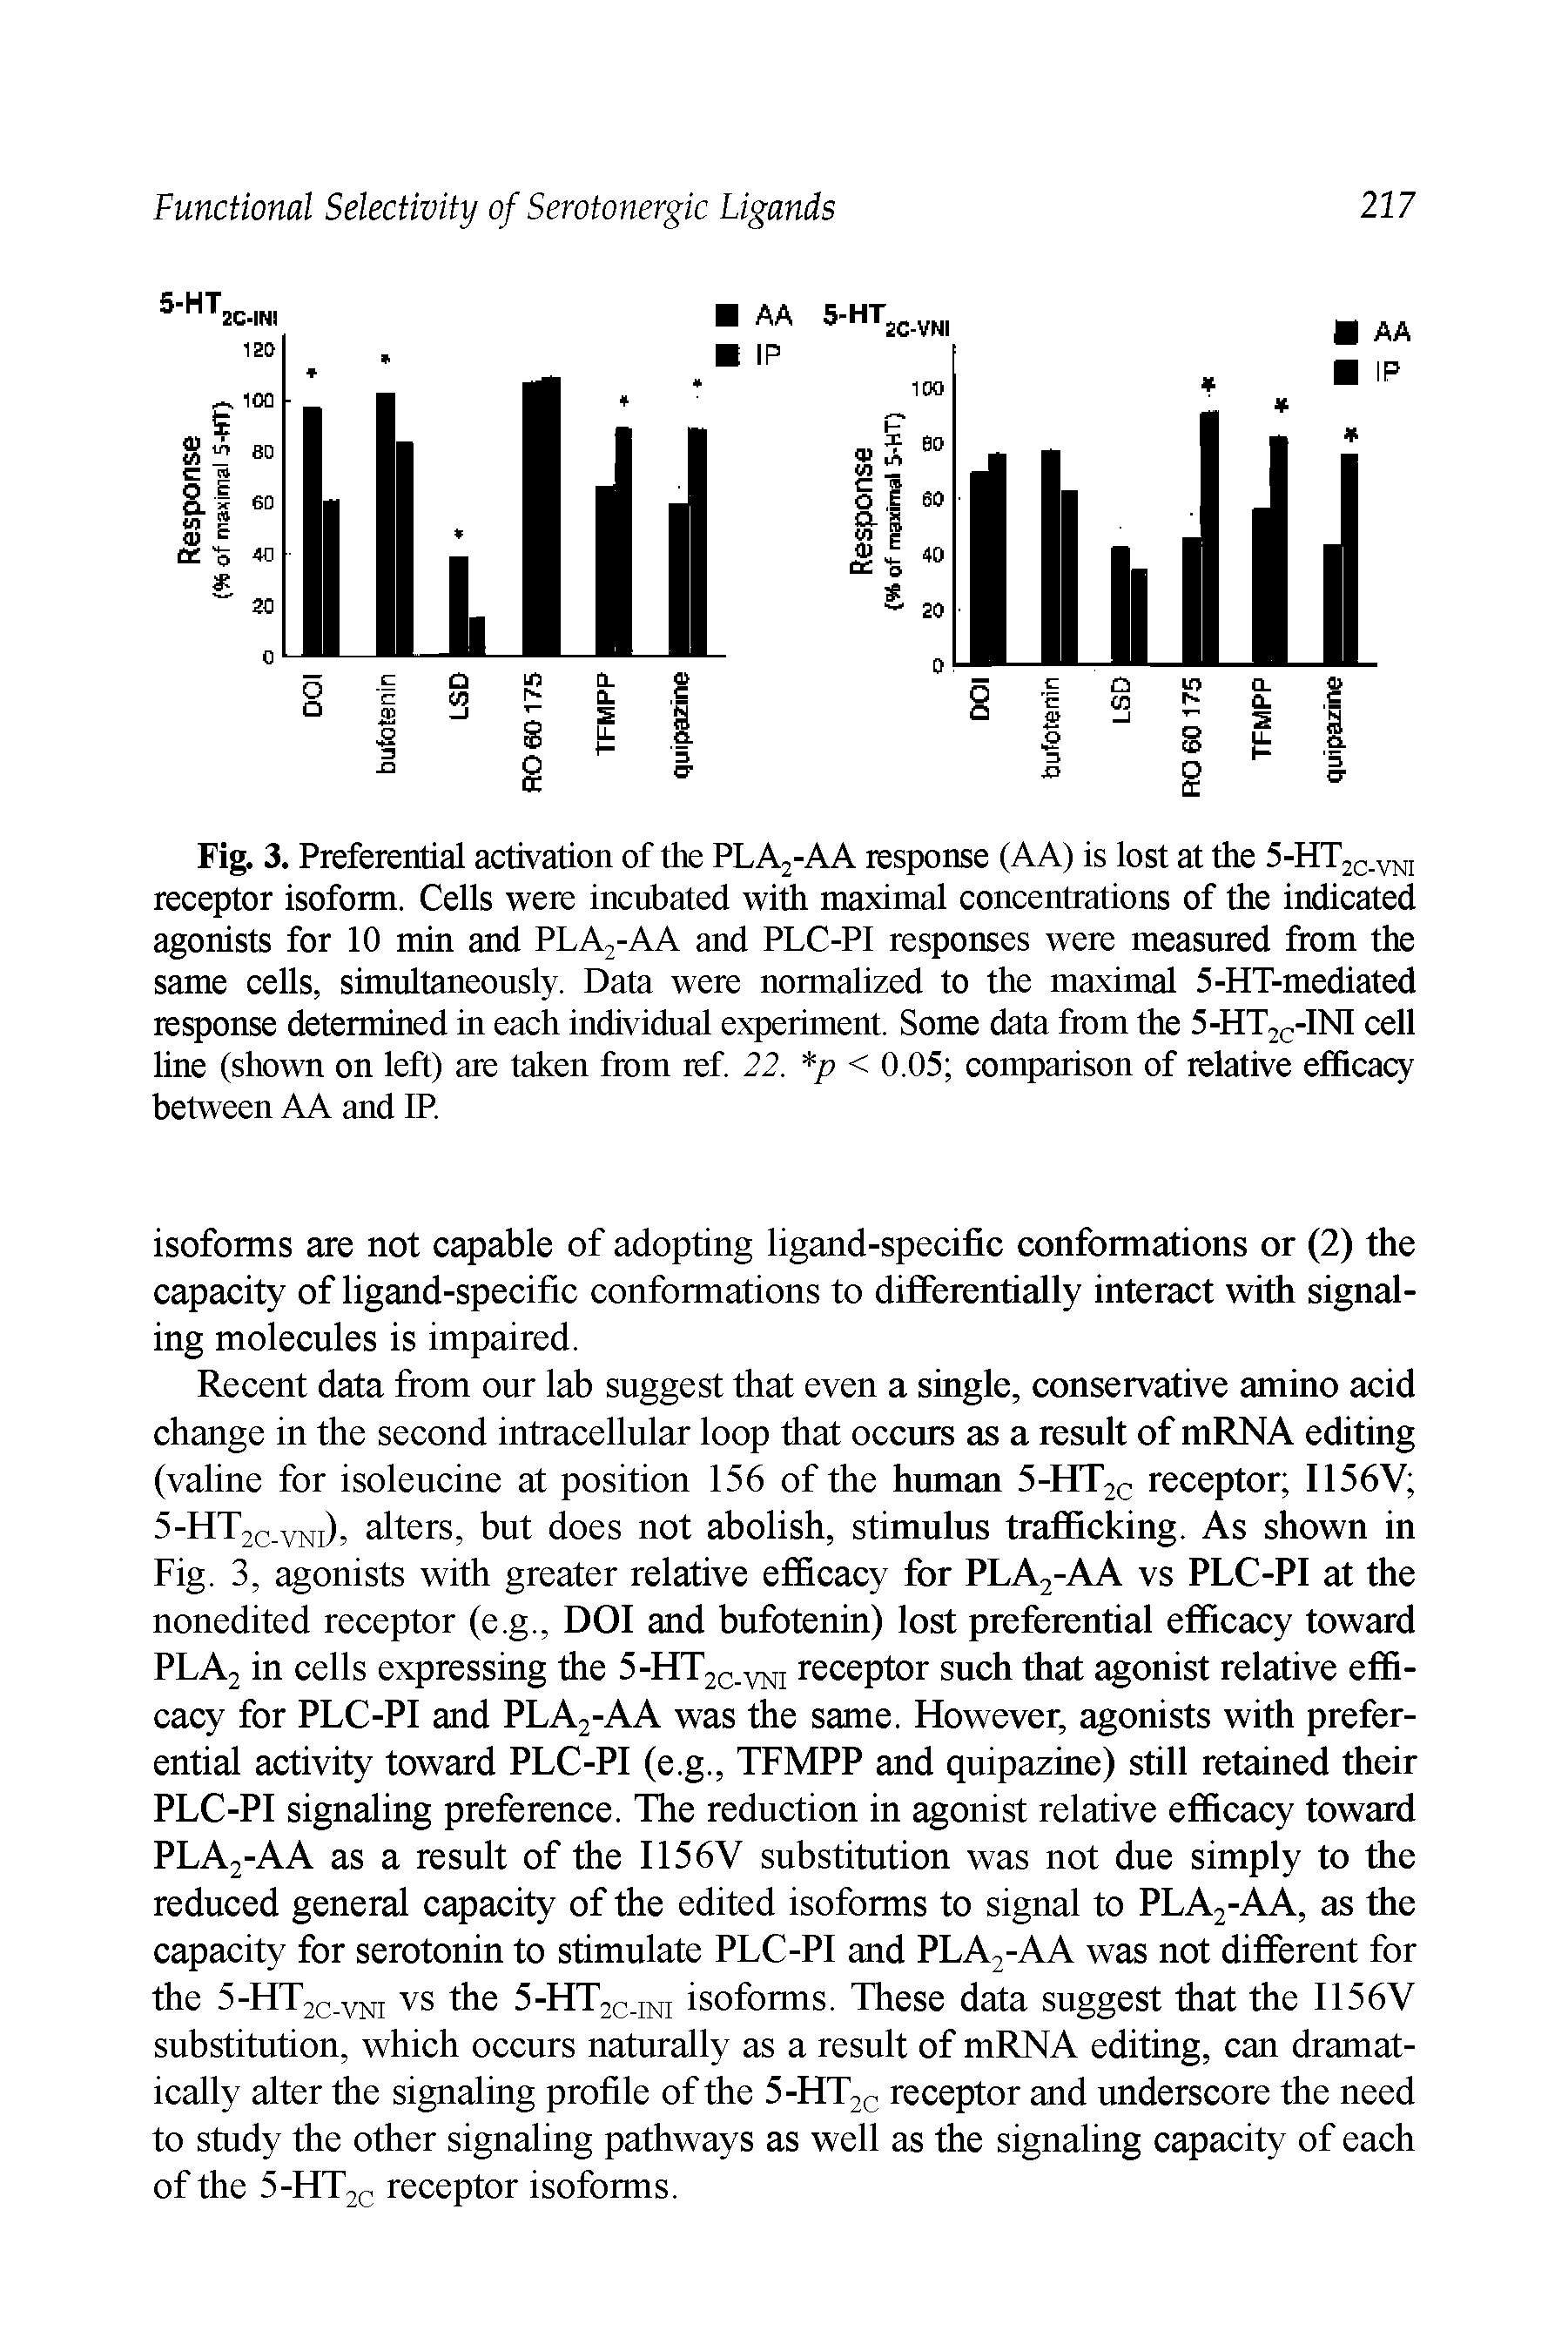 Fig. 3. Preferential activation of the PLA2-AA response (AA) is lost at the 5-HT2Q y2ji receptor isoform. Cells were incubated with maximal concentrations of the indicated agonists for 10 min and PLA2-AA and PLC-PI responses were measured from the same cells, simultaneously. Data were normalized to the maximal 5-HT-mediated response determined in each individual experiment. Some data from the 5-HT2C-INI cell line (shown on left) are taken from ref. 22. p < 0.05 comparison of relative efficacy between AA and IP.